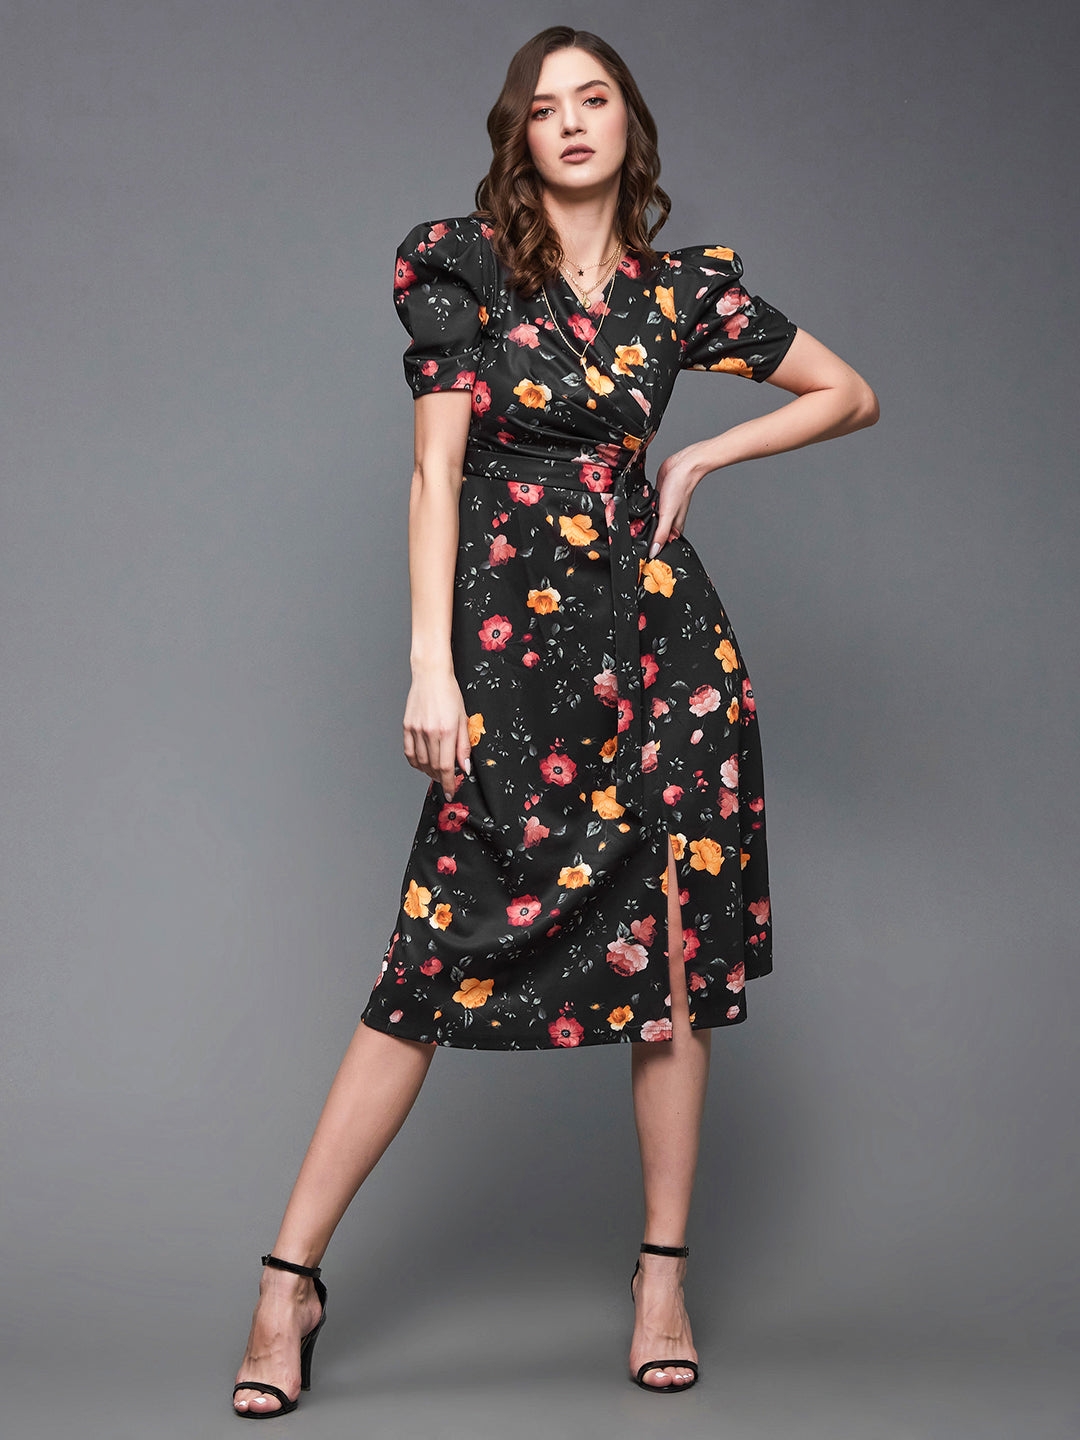 MISS CHASE | Women's Black Polyester Casualwear Fit & Flare Dress